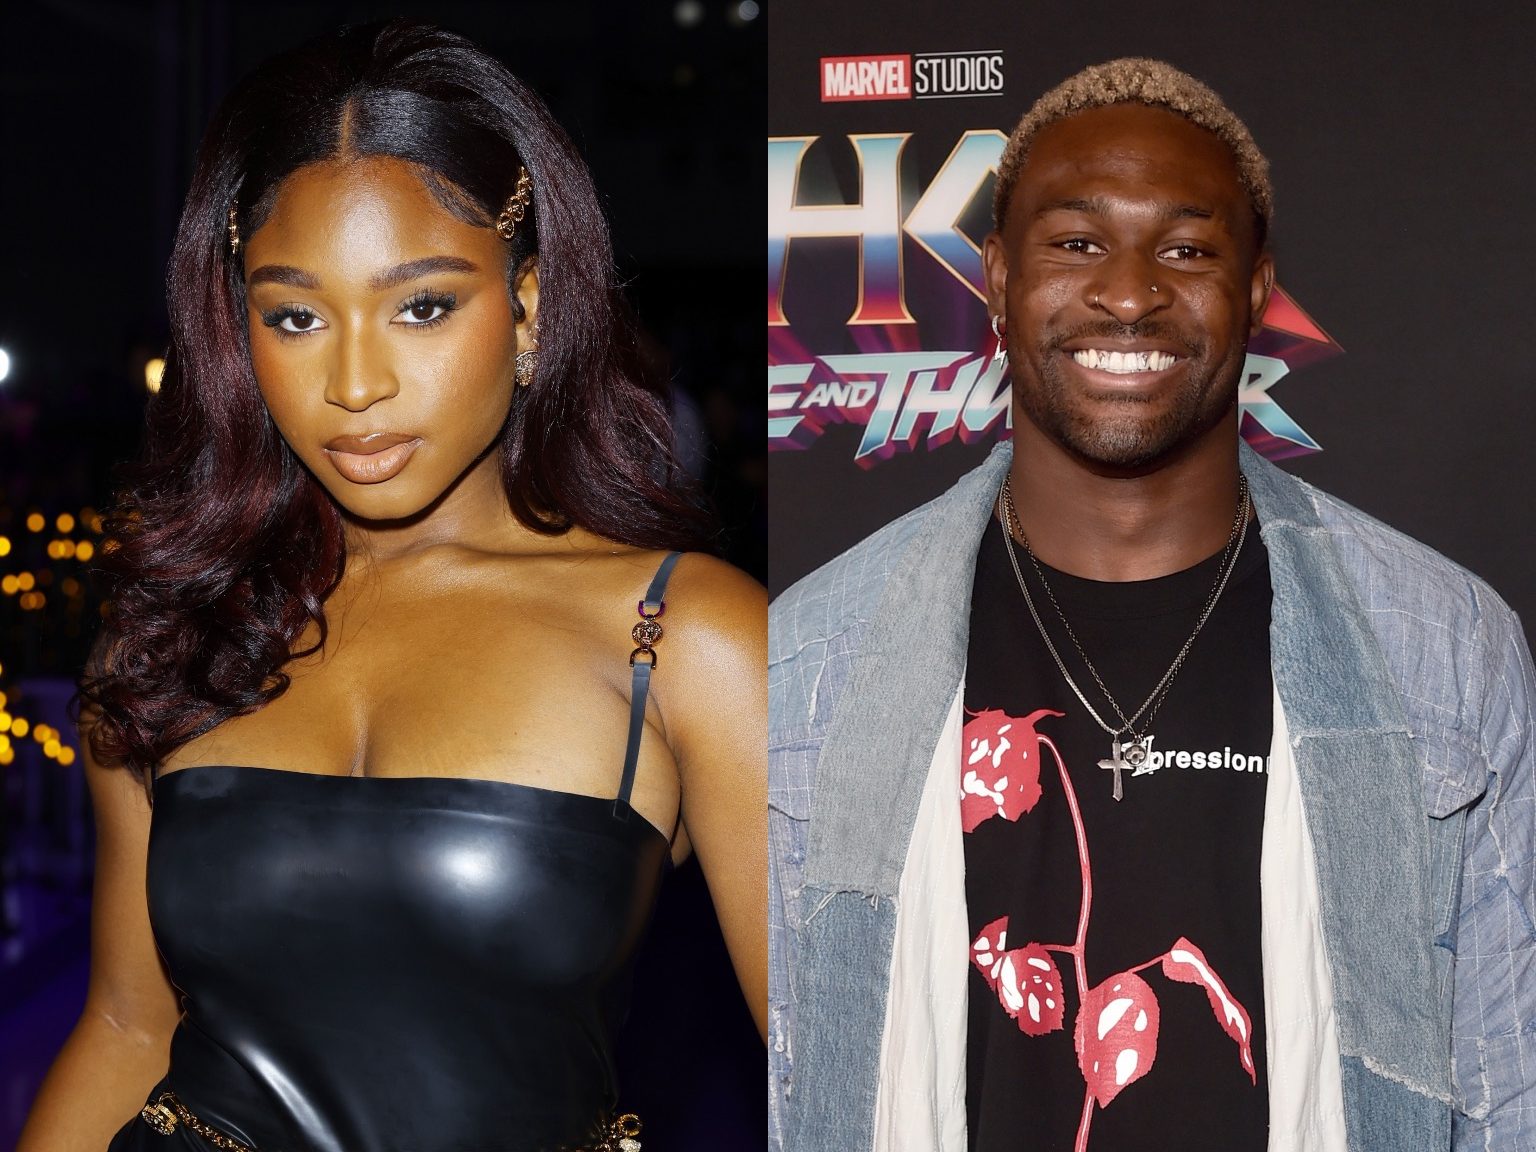 Exclusive: Normani and DK Metcalf Spotted on Romantic Dinner Date - Are They Dating? 15